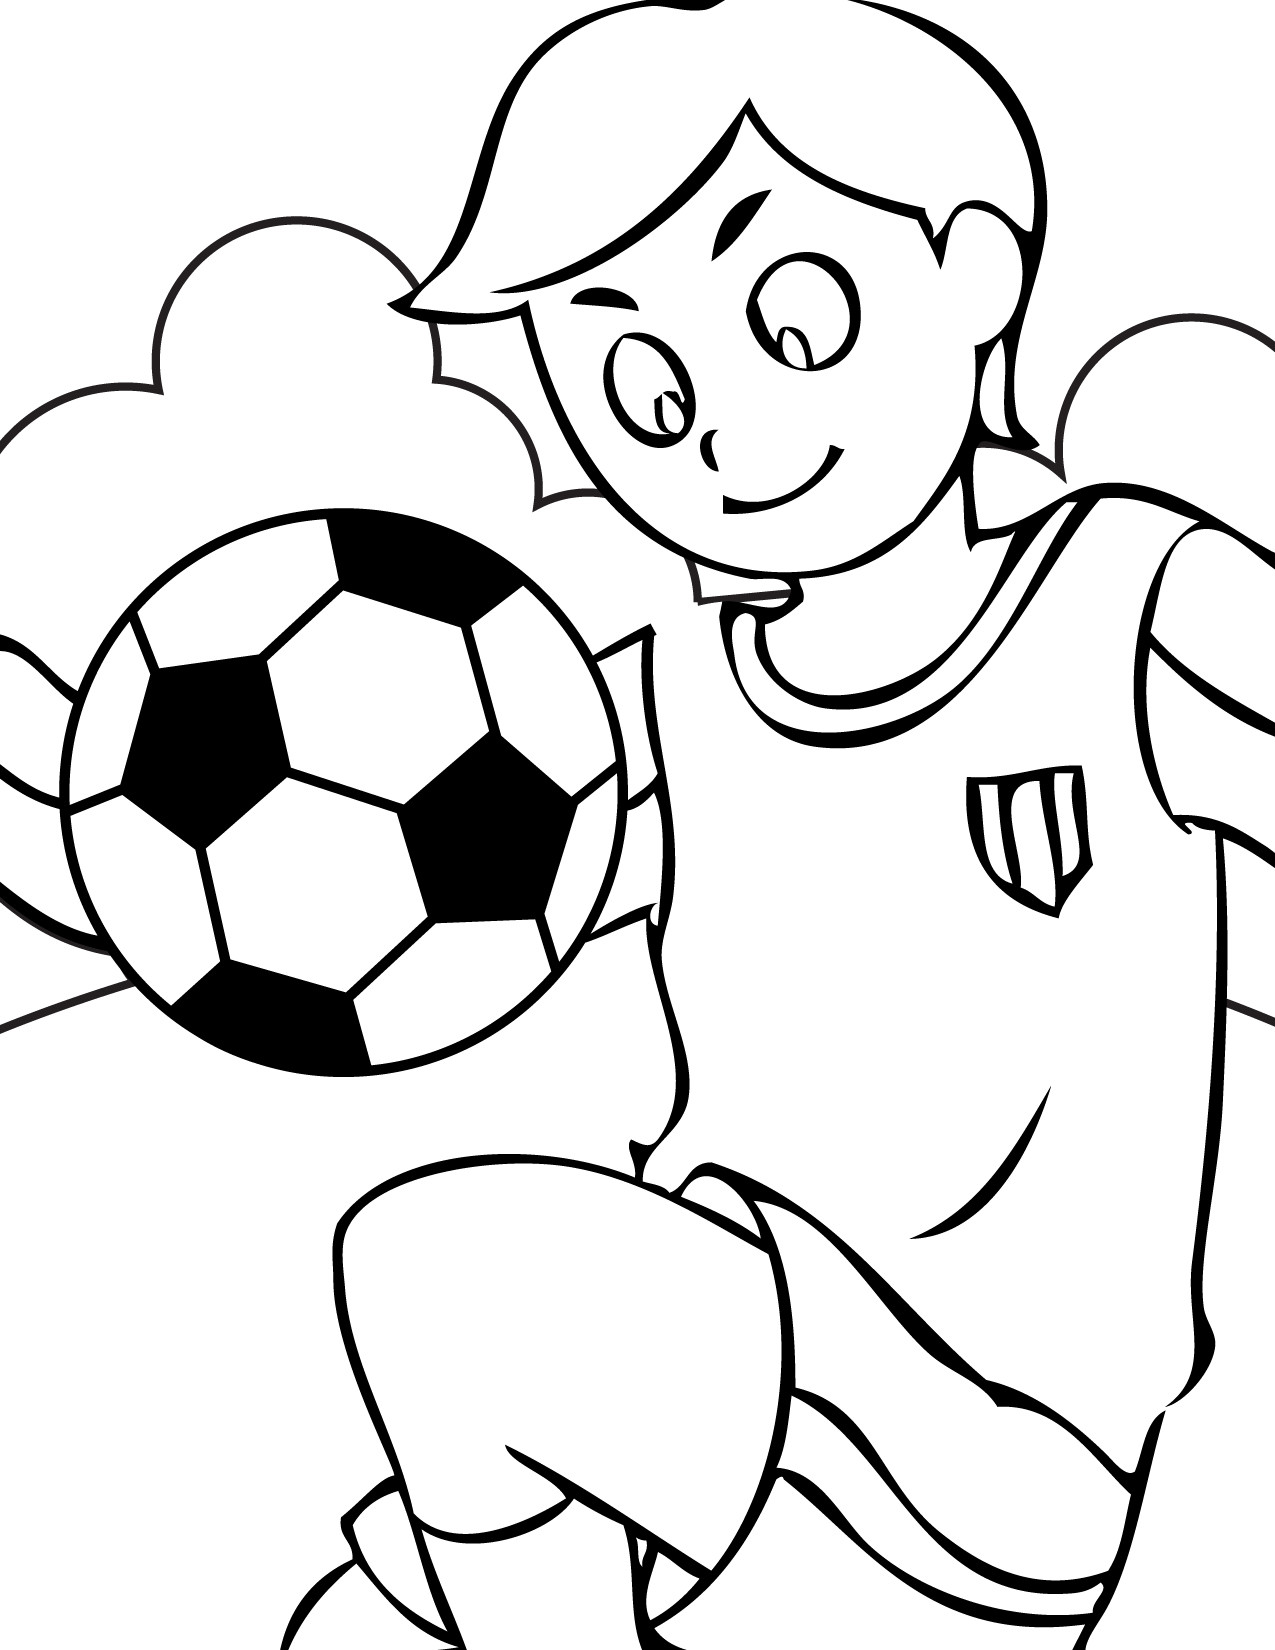 Coloring Pages For Boys Sports
 sports coloring pages for boys